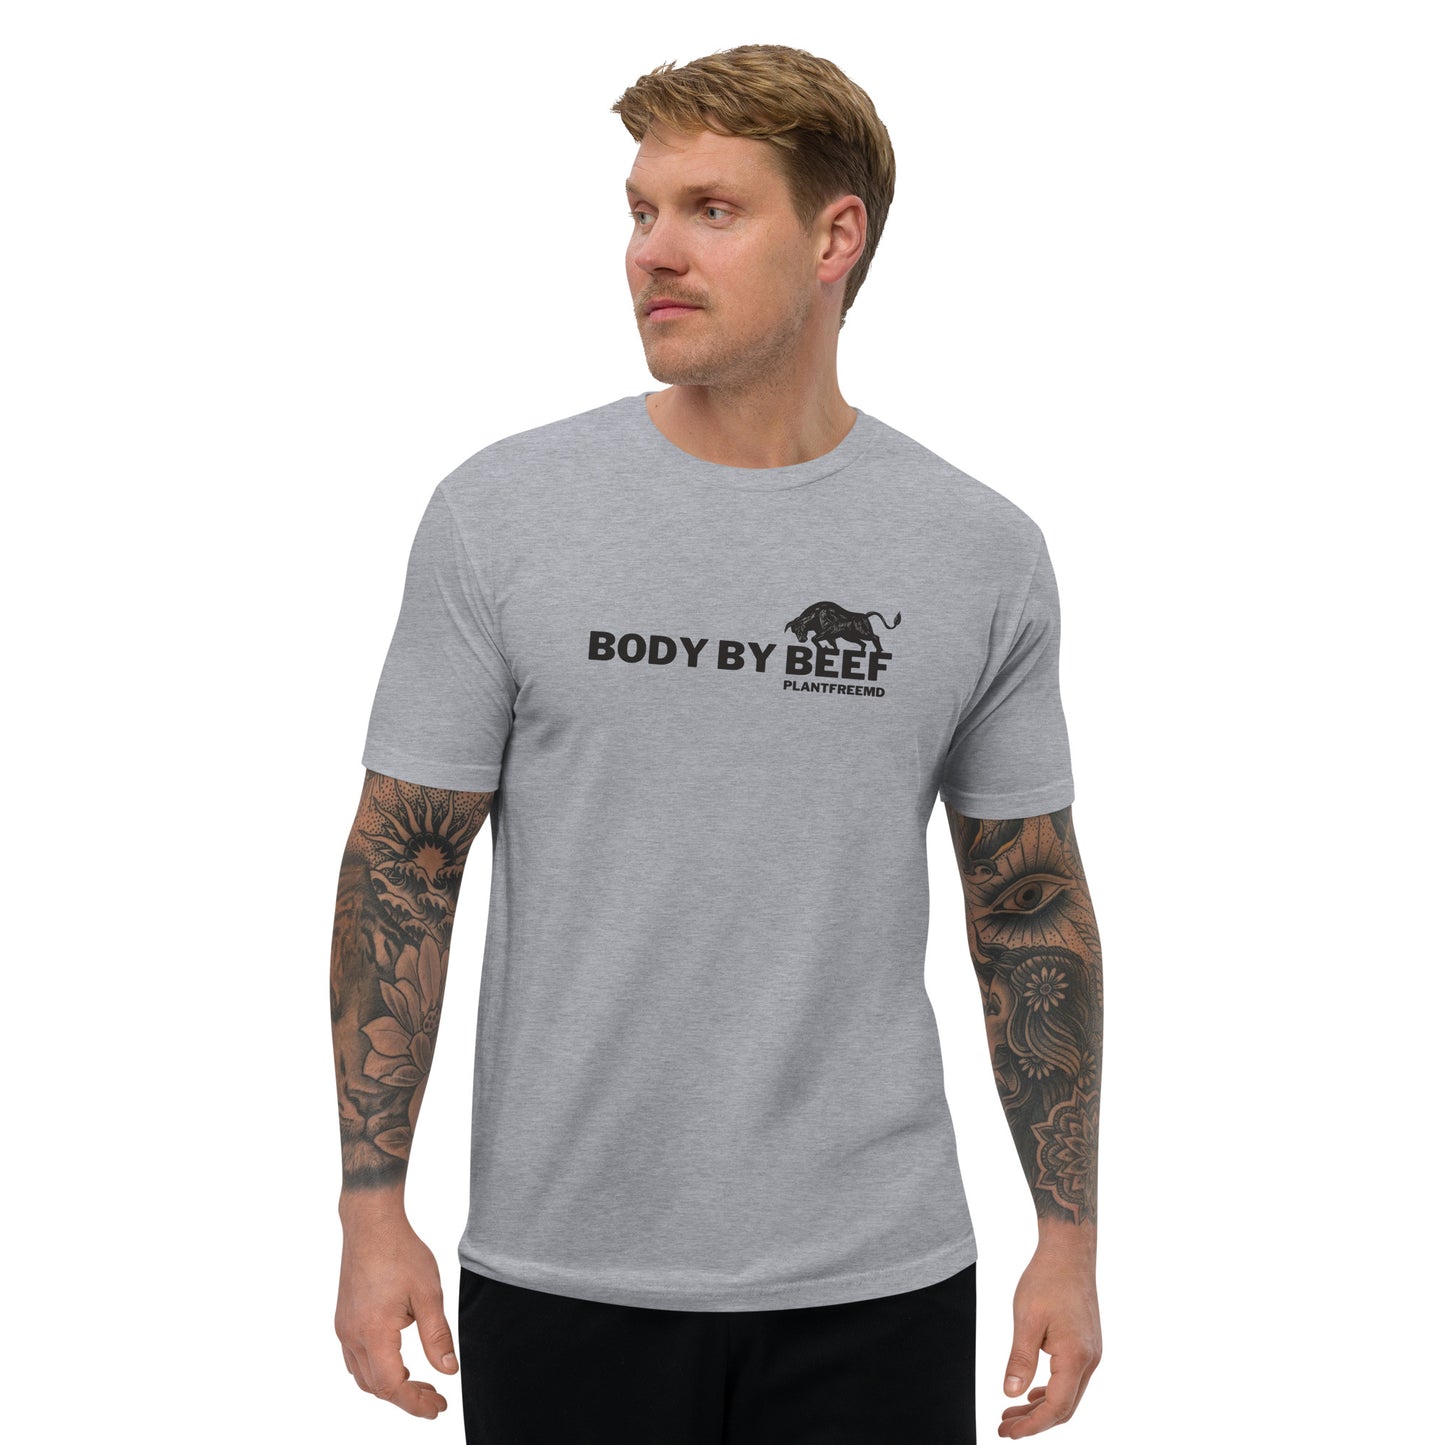 Body By Beef 2 Men's Fitted T-shirt